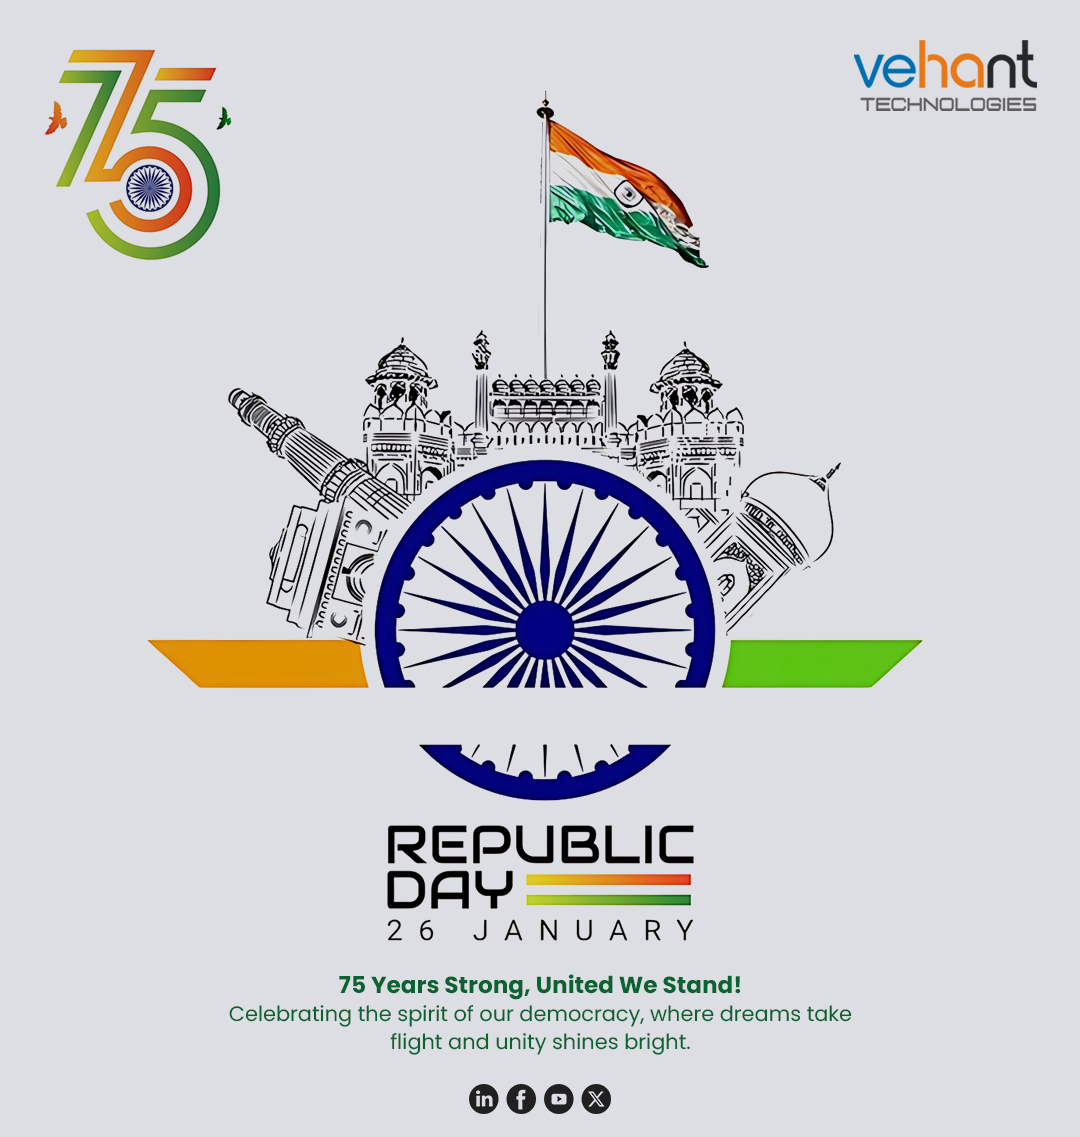 75 years strong, our flag flies high🙌
Celebrating the ideals of justice, liberty, and equality.

From diverse lands, one united voice
Happy Republic Day!

#RepublicDay  #75yearsofindependence  #vehant #unityindiversity #India #NewIndia #RepublicDayIndia